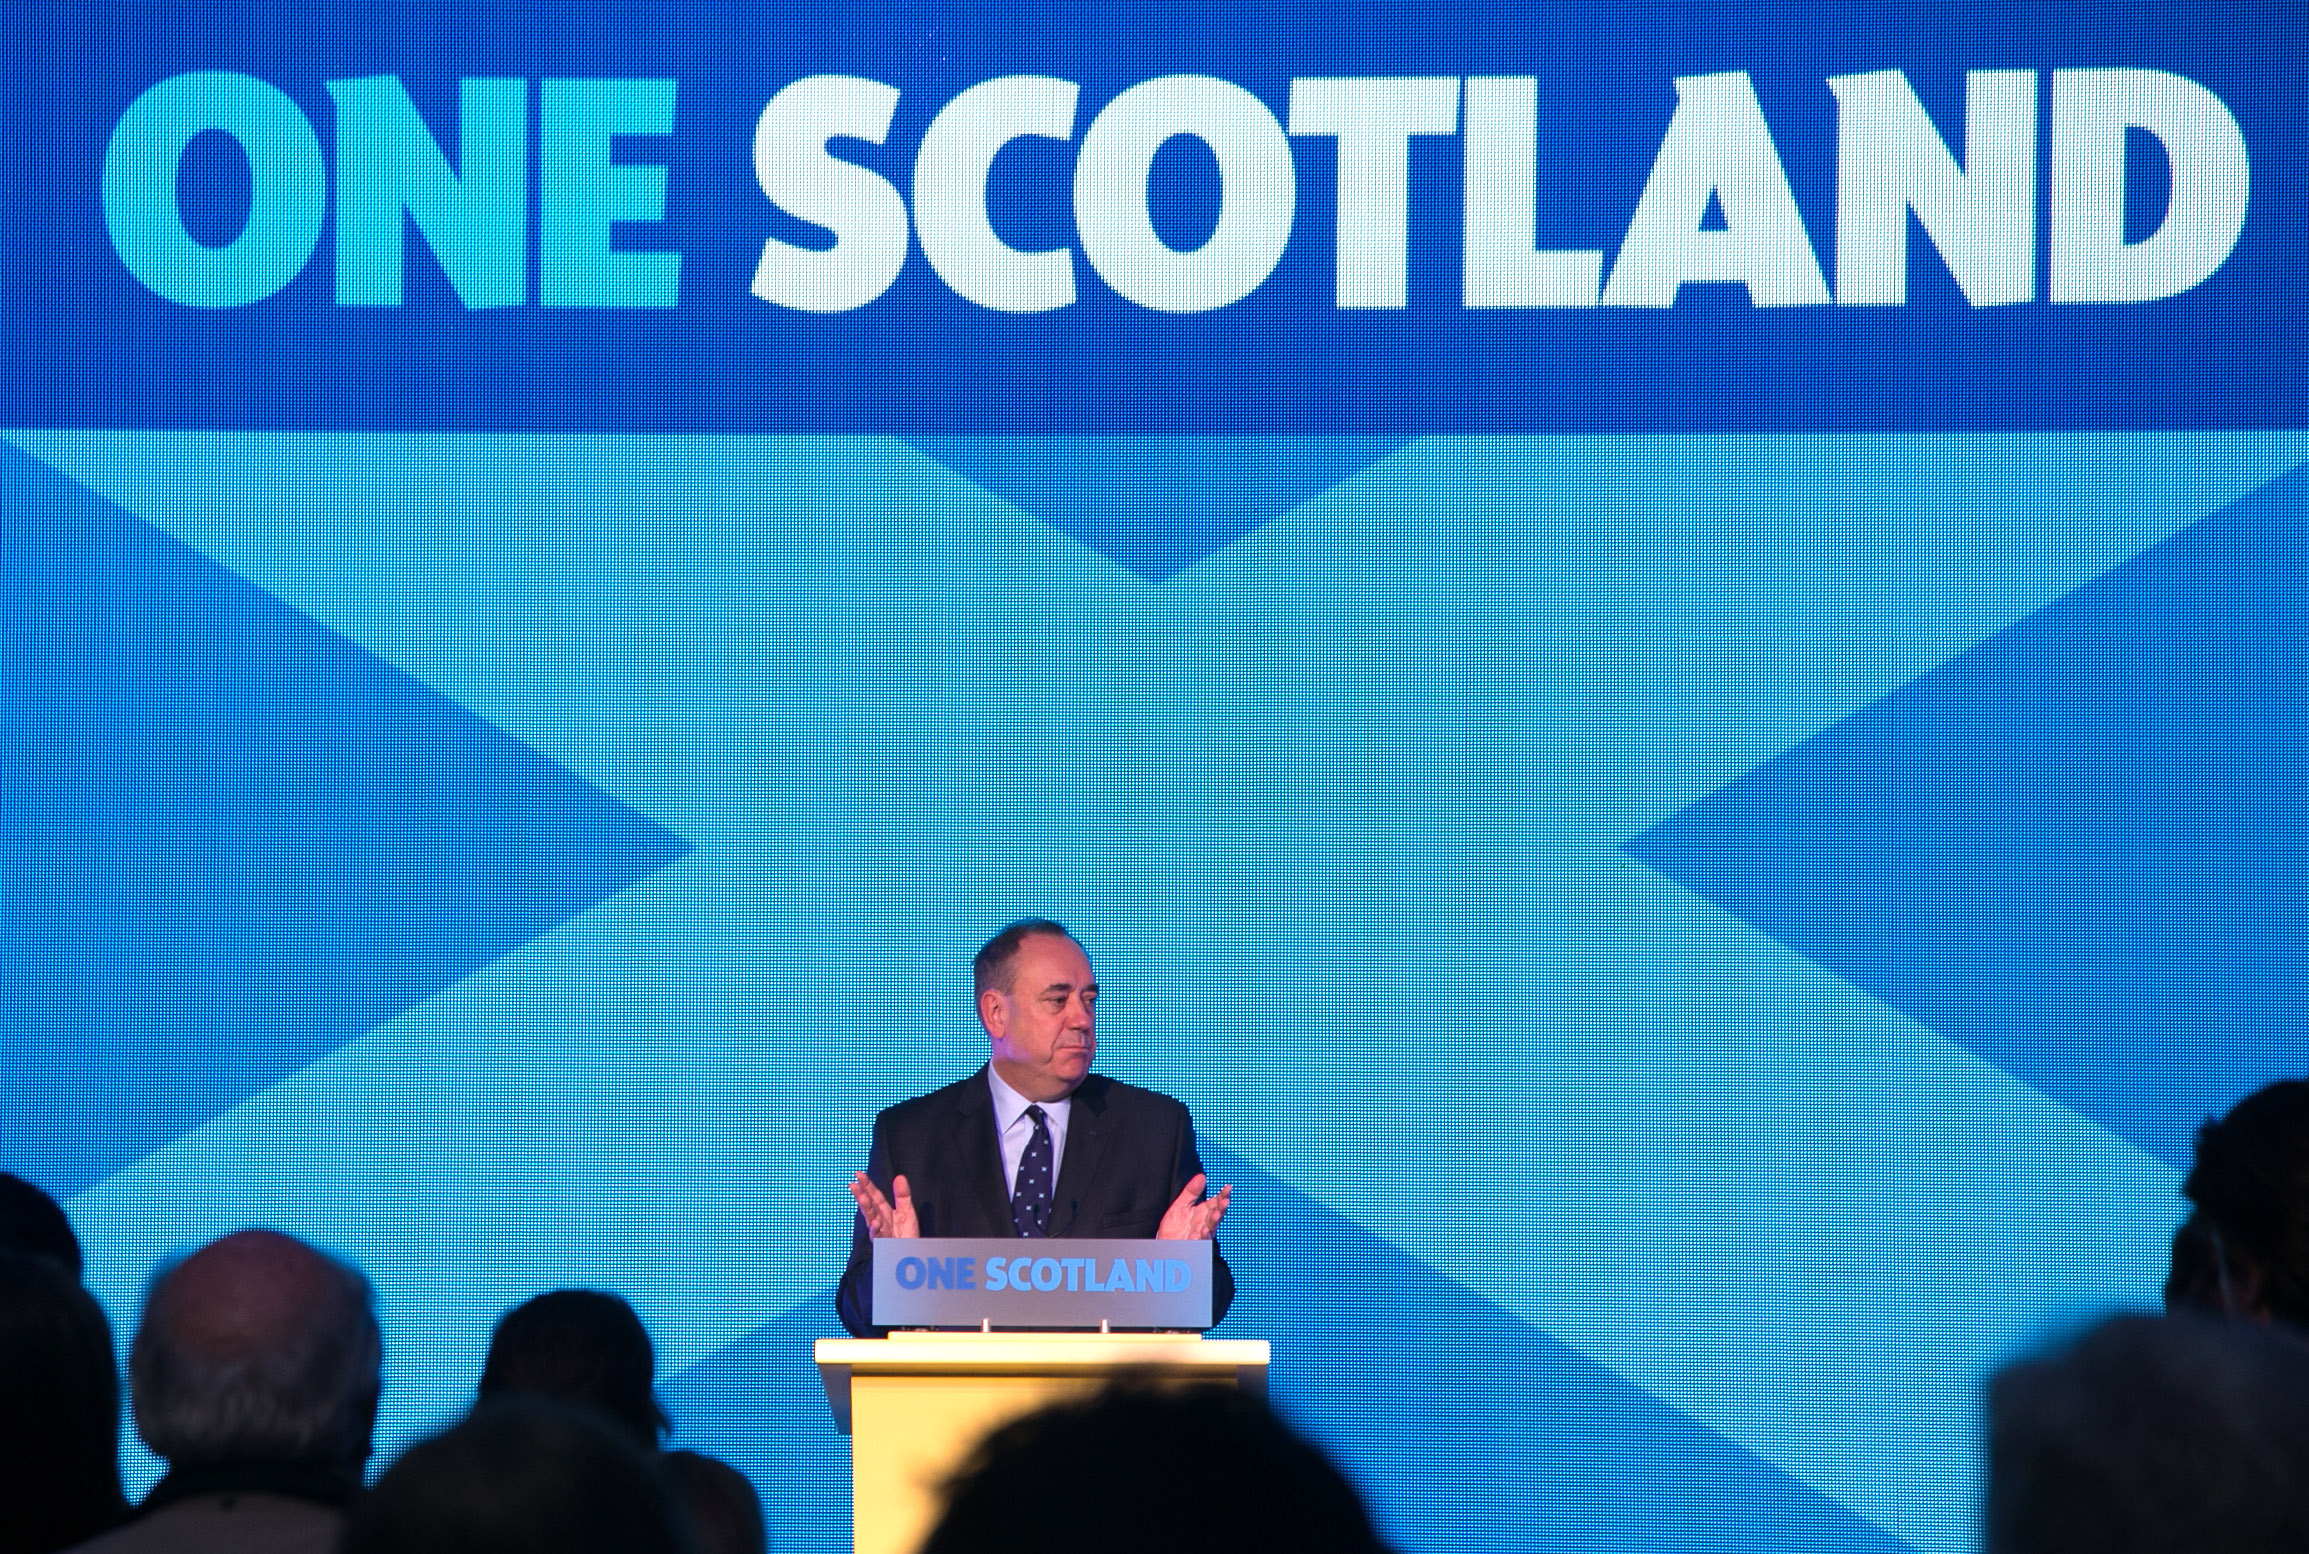 Scotland Decides - The Result Of the Scottish Referendum On Independence Is Announced